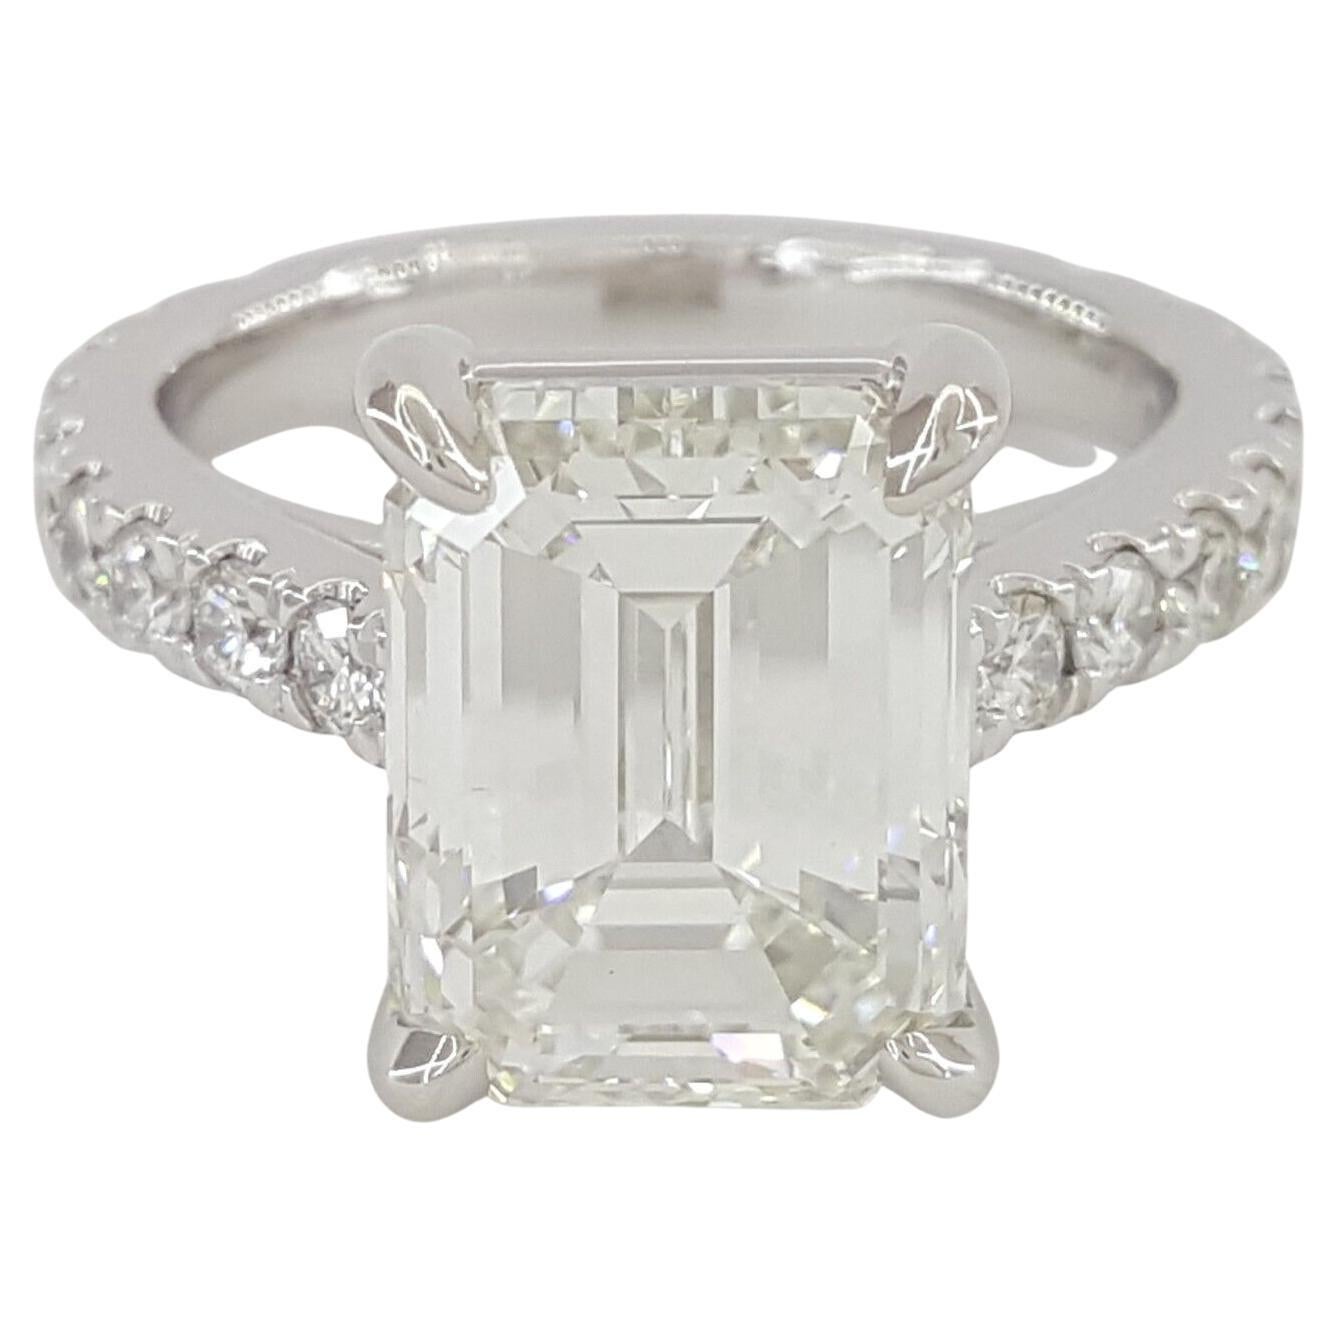 GIA Certified 4 Carat Emerald Cut Diamond Solitaire Ring E COLOR FLAWLESS